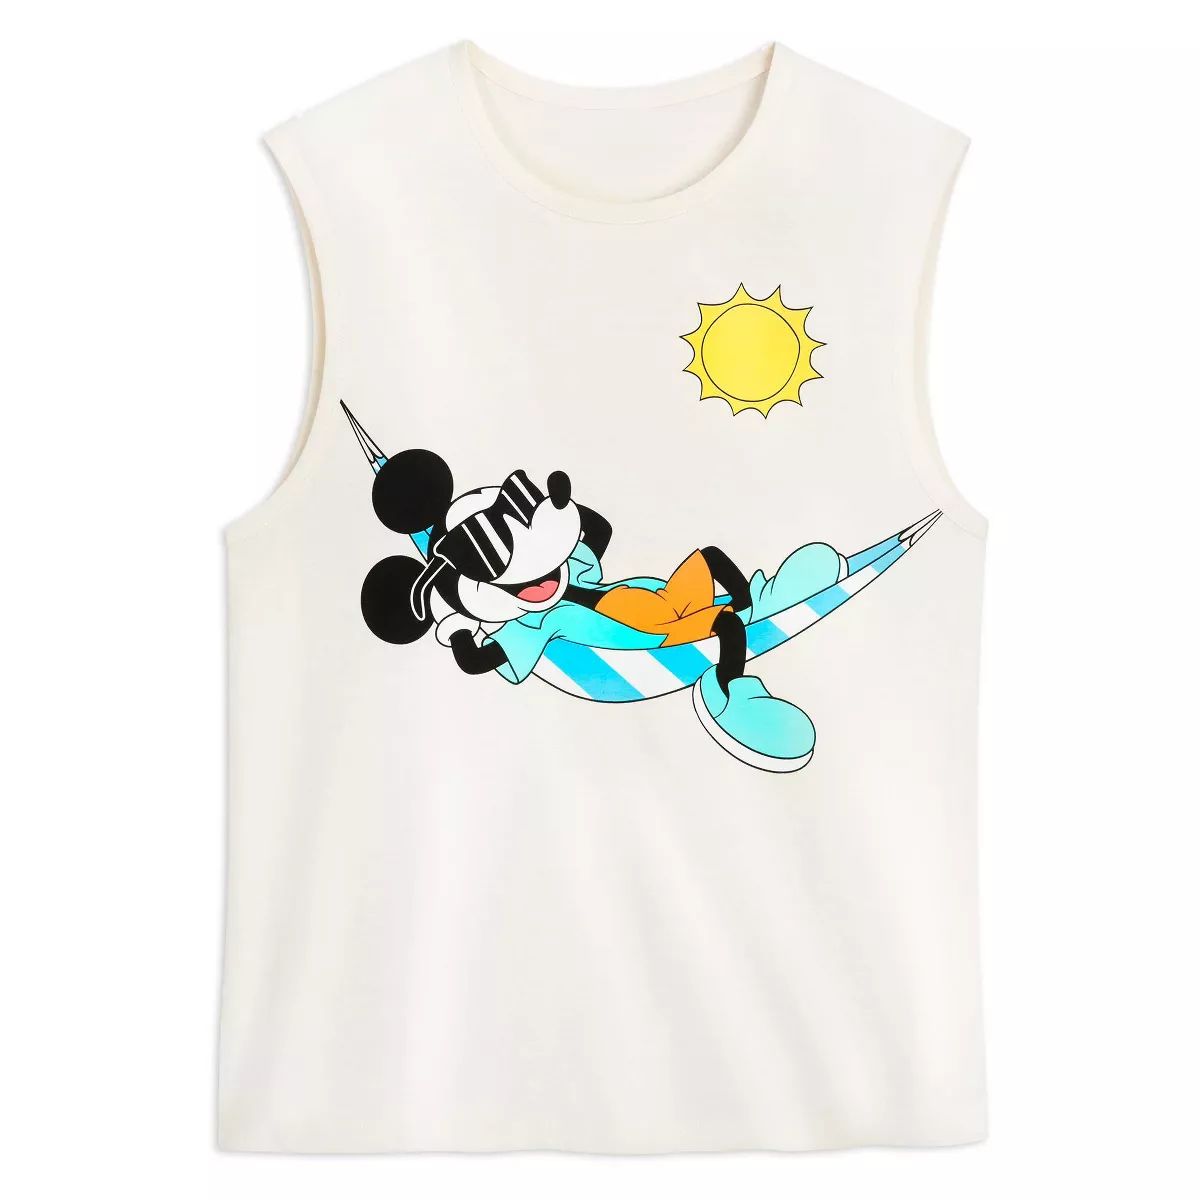 Men's Mickey Mouse Graphic Tank Top - White - Disney Store | Target